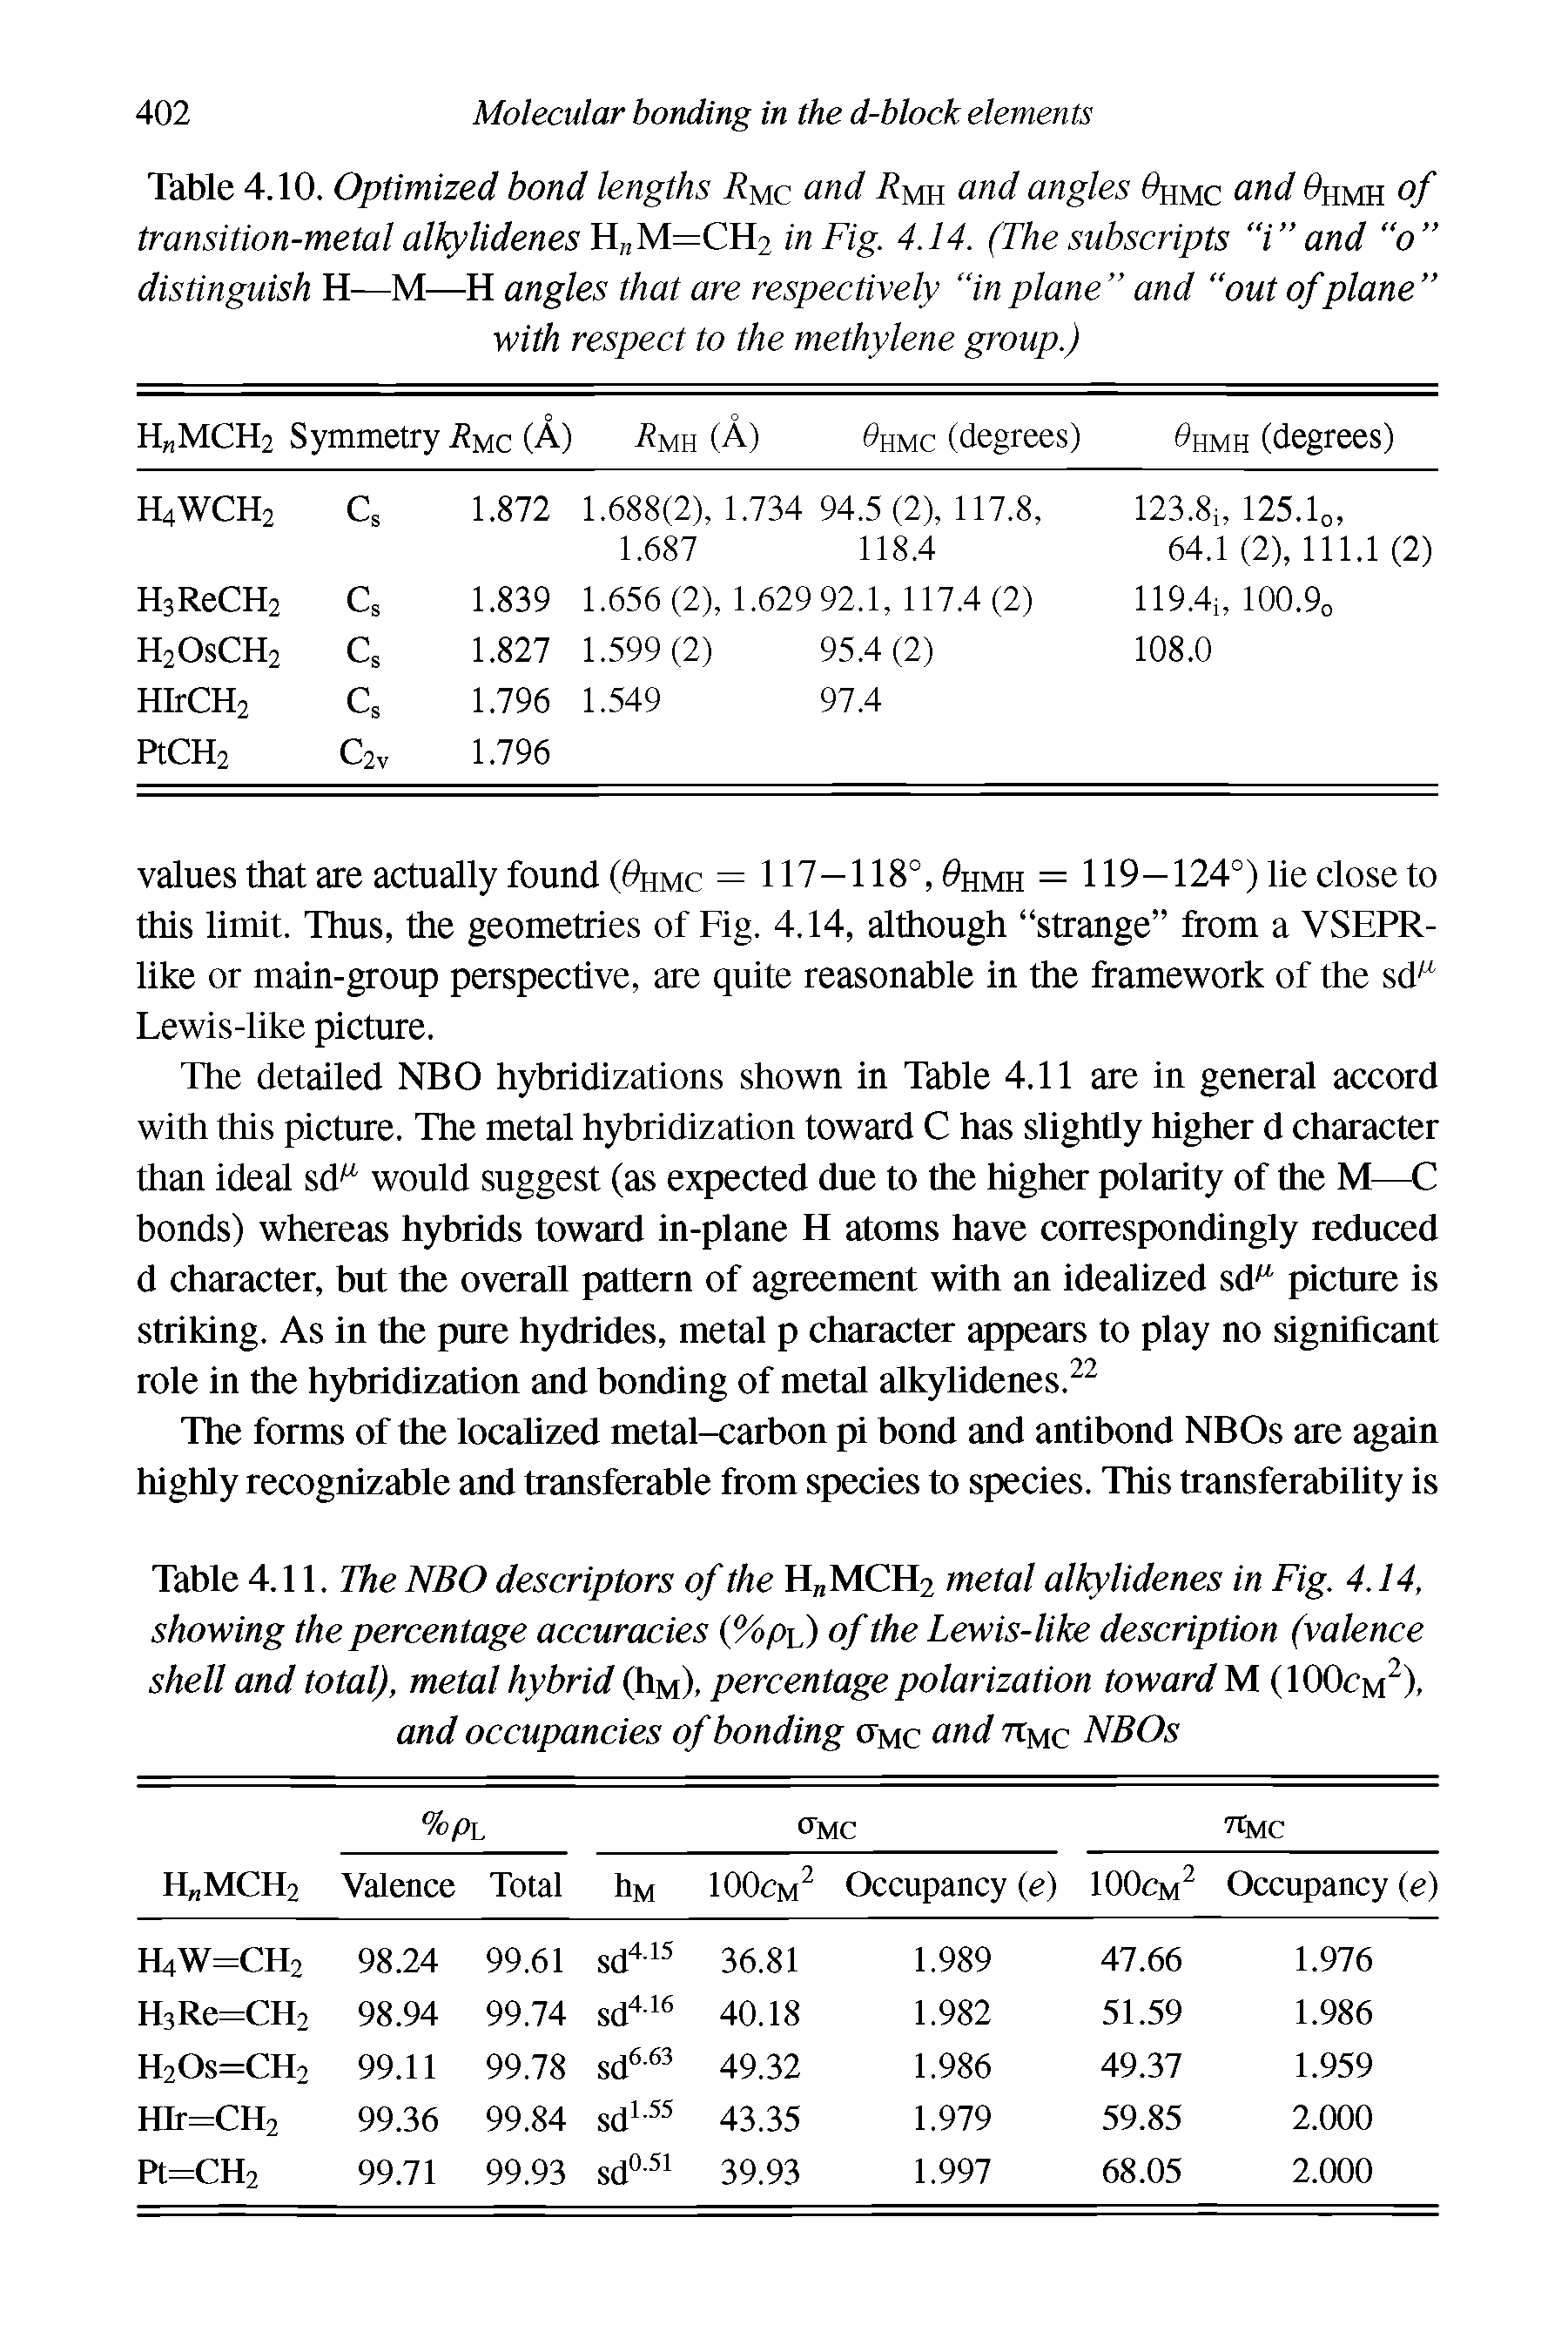 Table 4.10. Optimized bond lengths Rue and Rmh and angles hmc and hmh of transition-metal alkylidenes H ,M=CH2 in Fig. 4.14. (The subscripts i and "o distinguish H—M—H angles that are respectively in plane and out of plane with respect to the methylene group.)...